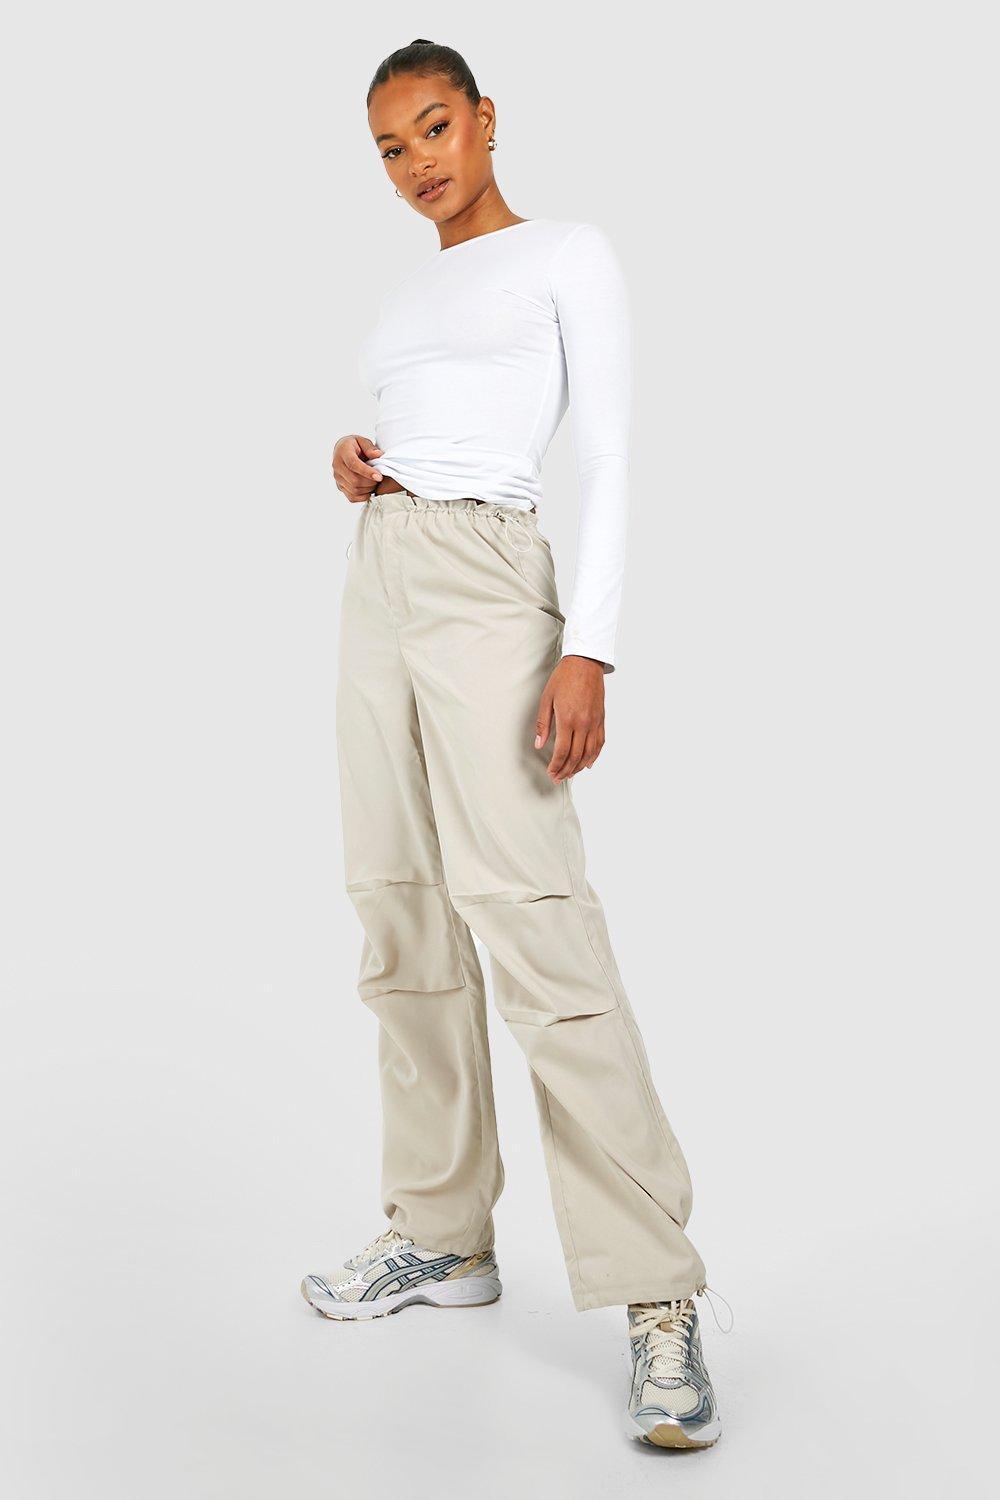 Boohoo Tall Low Rise Elasticated Waist Cargo Parachute Pants in Natural |  Lyst